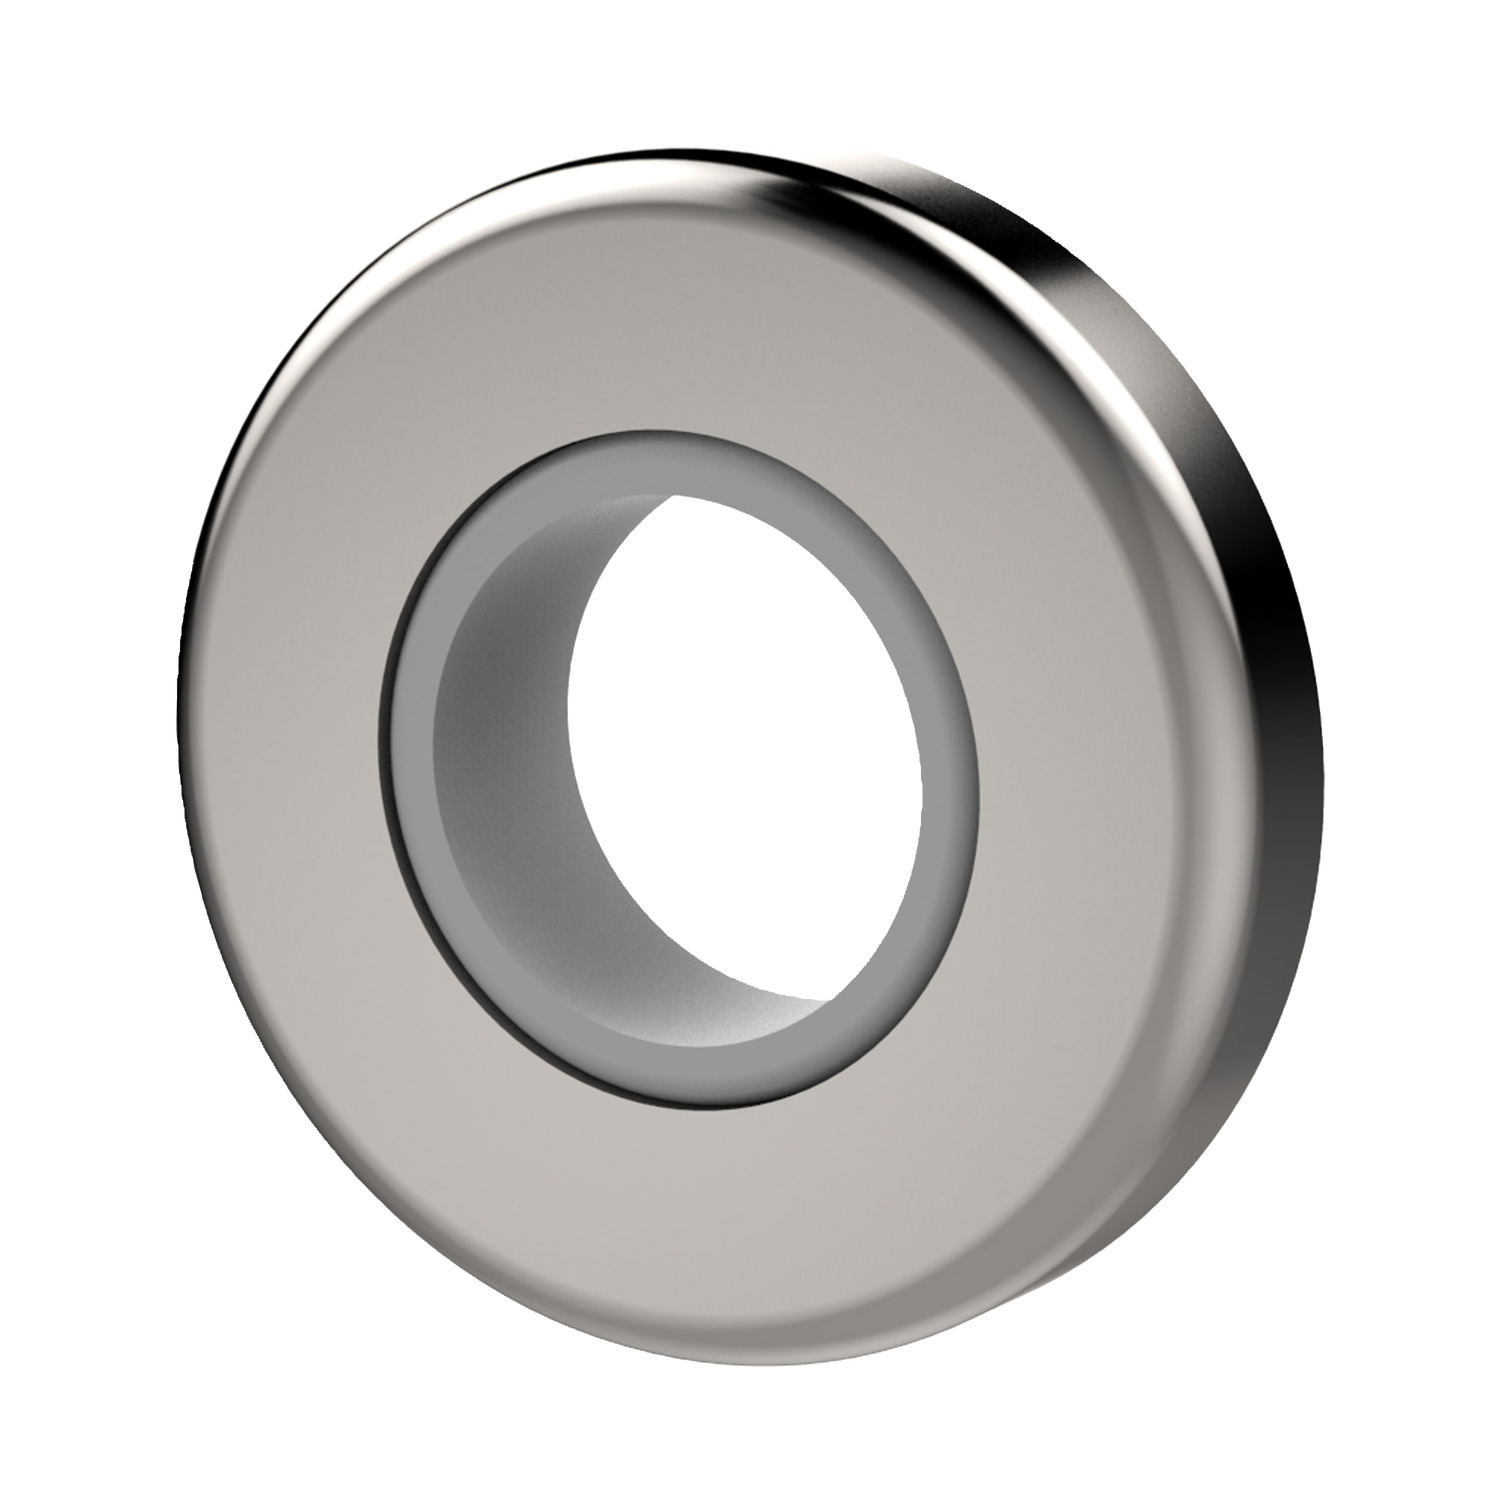 Product 36637, Waterproof Seal Washers 304 stainless steel / 